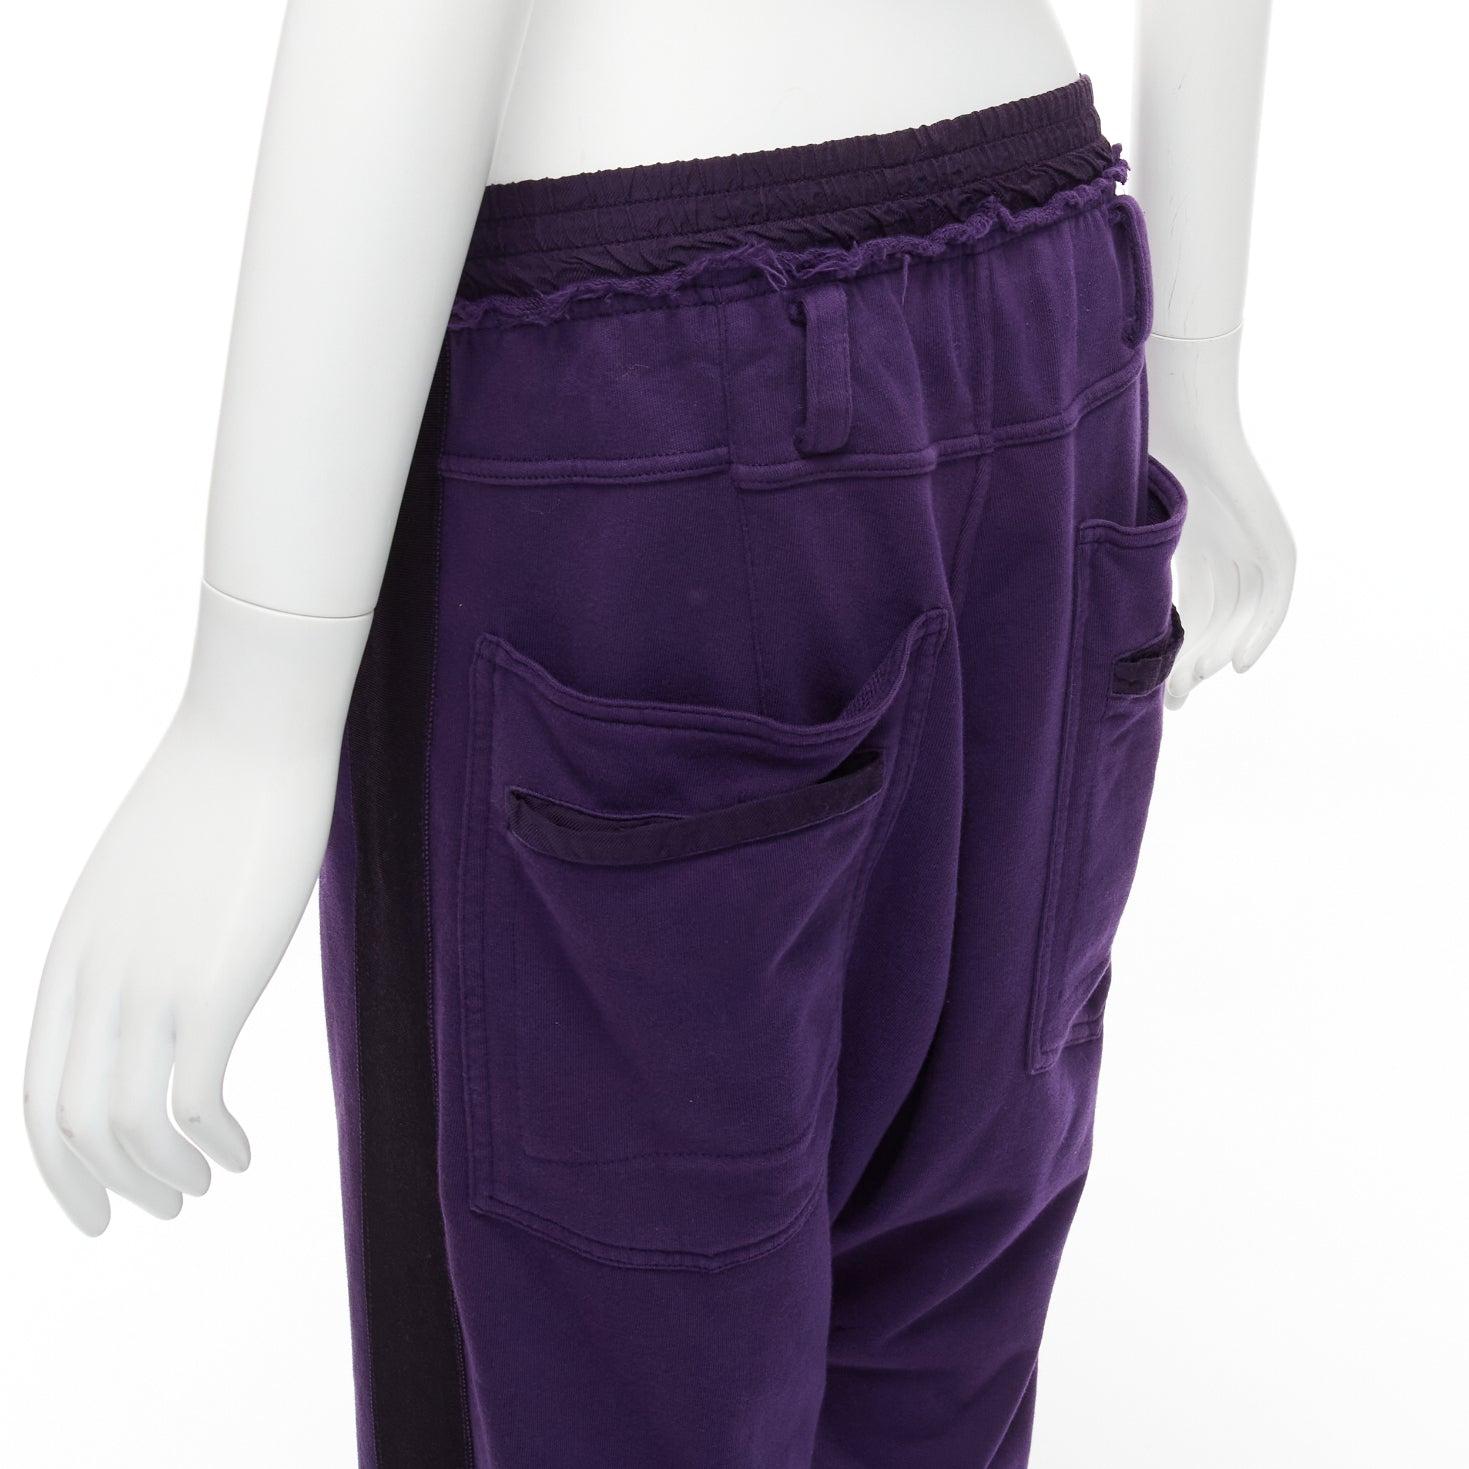 HAIDER ACKERMANN purple 100% washed cotton black trimmed darted joggers S
Reference: CNLE/A00273
Brand: Haider Ackermann
Material: Cotton
Color: Purple, Black
Pattern: Solid
Closure: Elasticated
Extra Details: Trimmed double layer pockets. at back